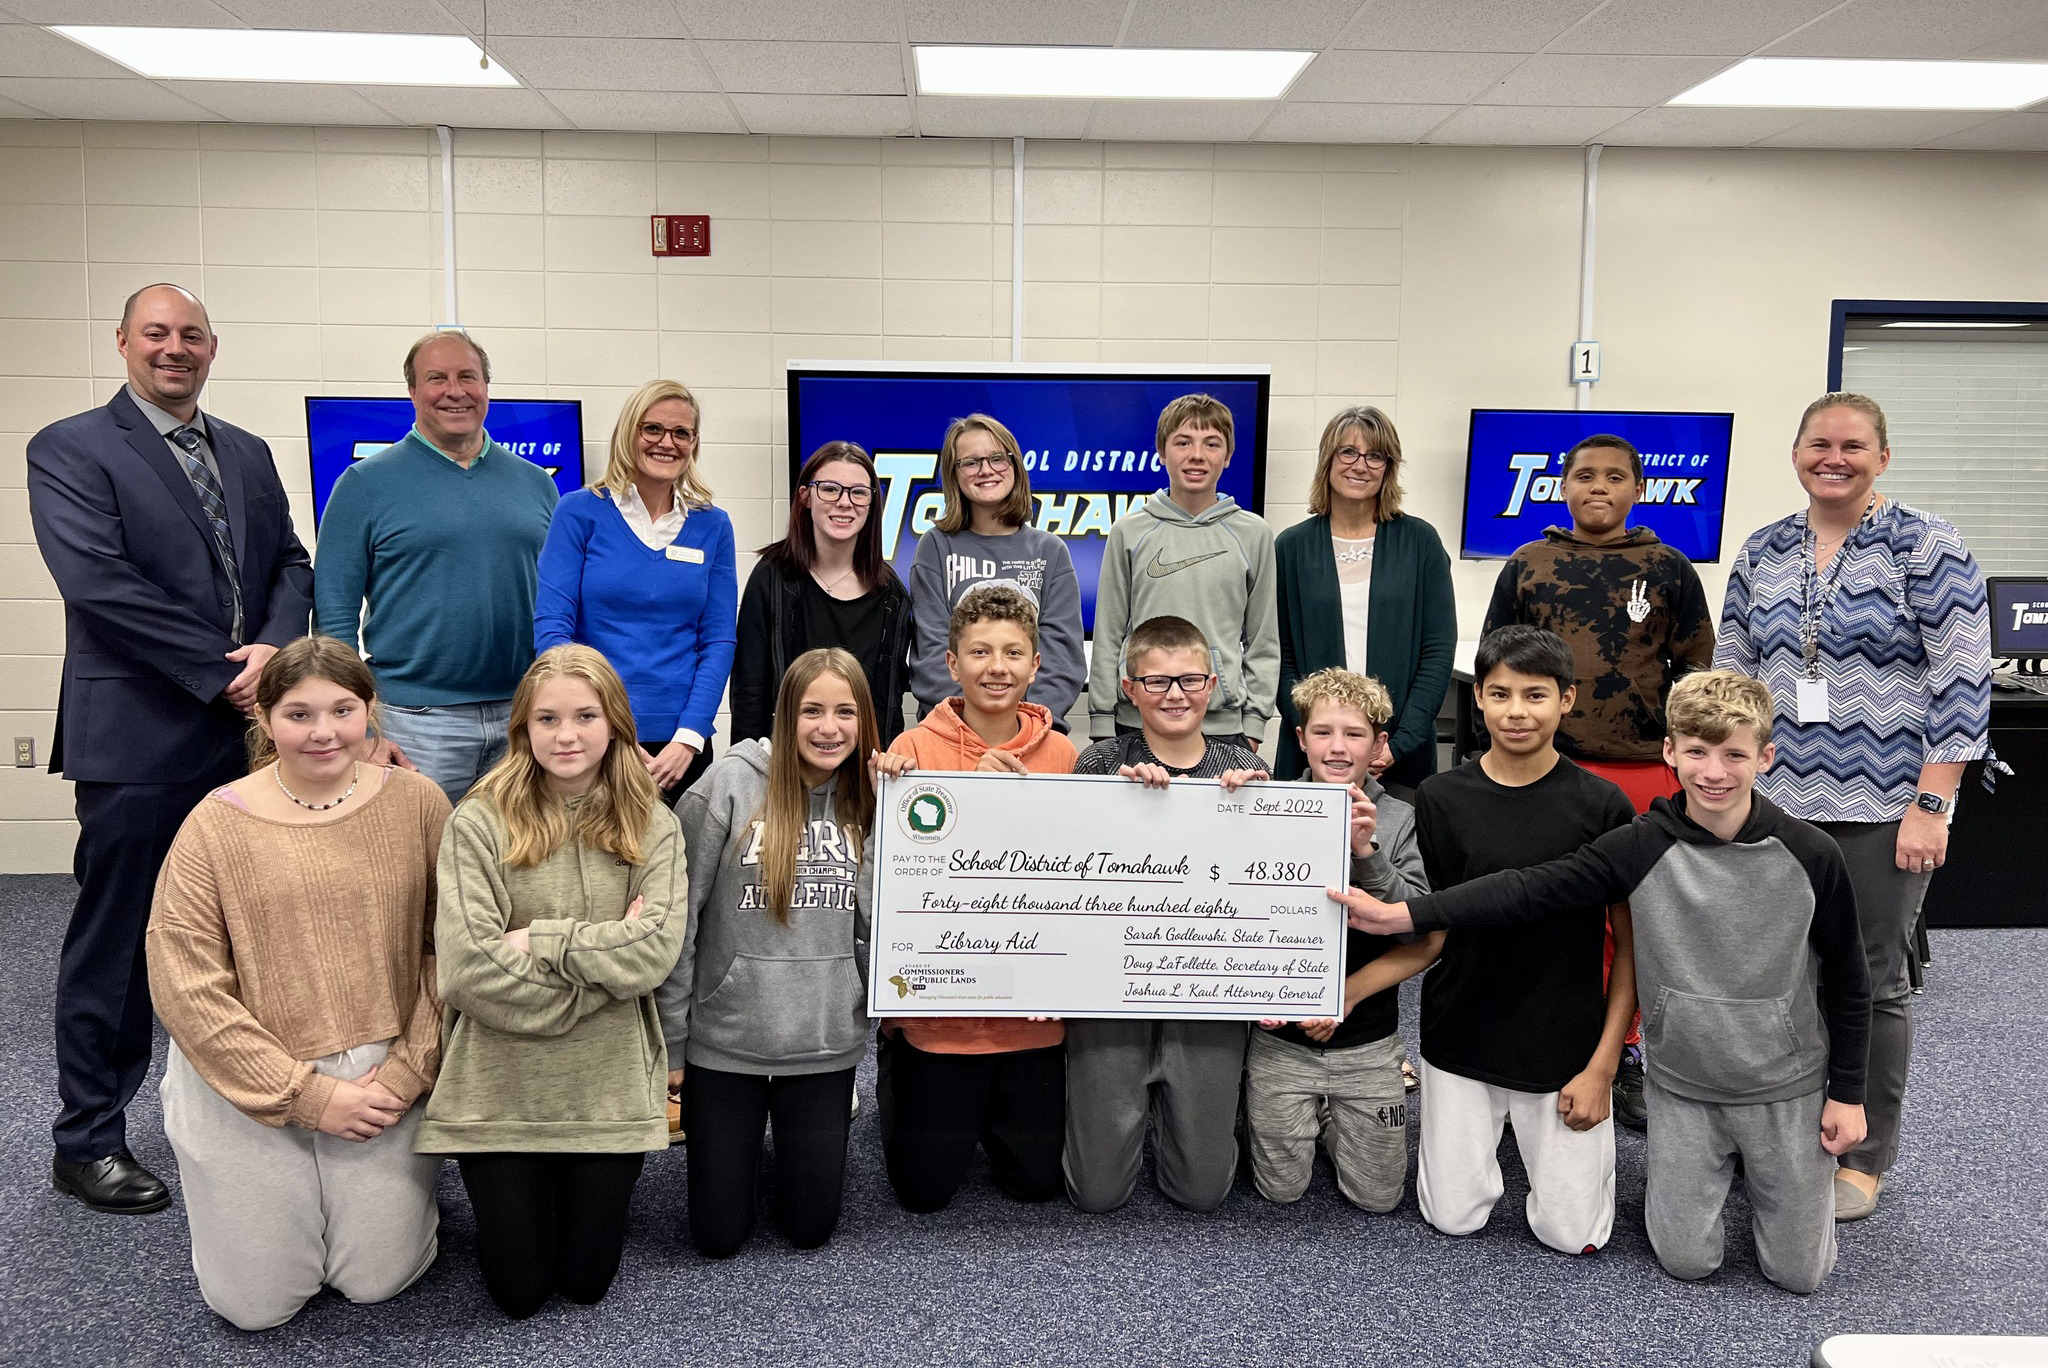 Tomahawk Middle School library receives $48,000.00 from Common School Fund